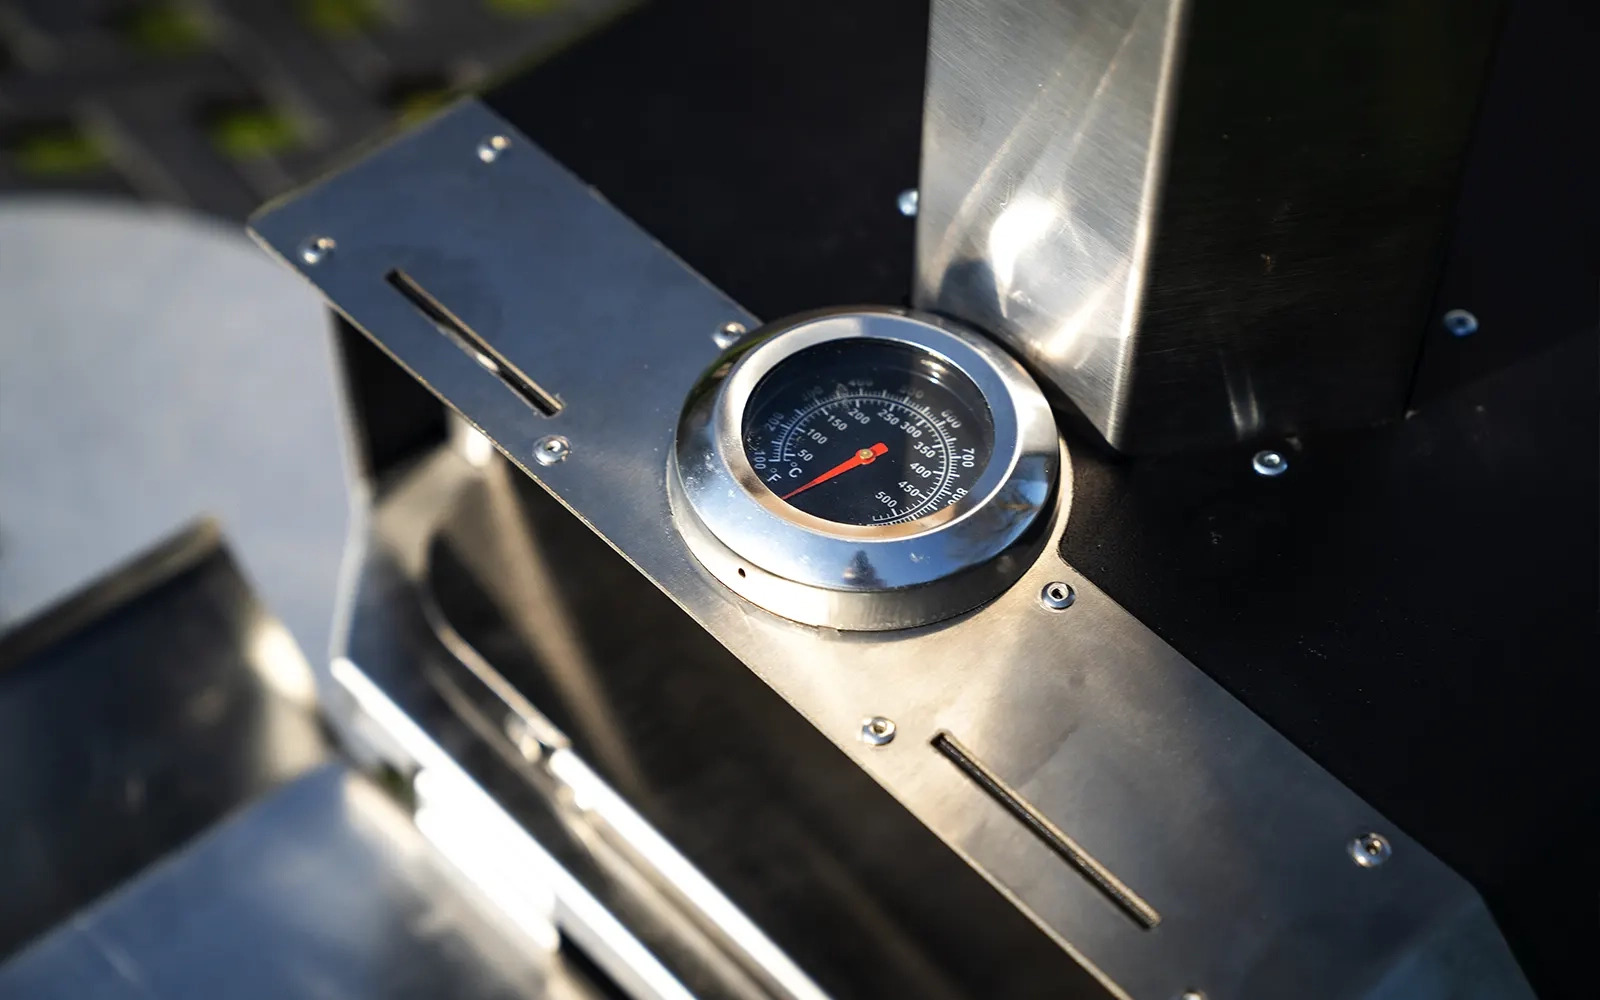 Close-up of the temperature guage on a pizza oven